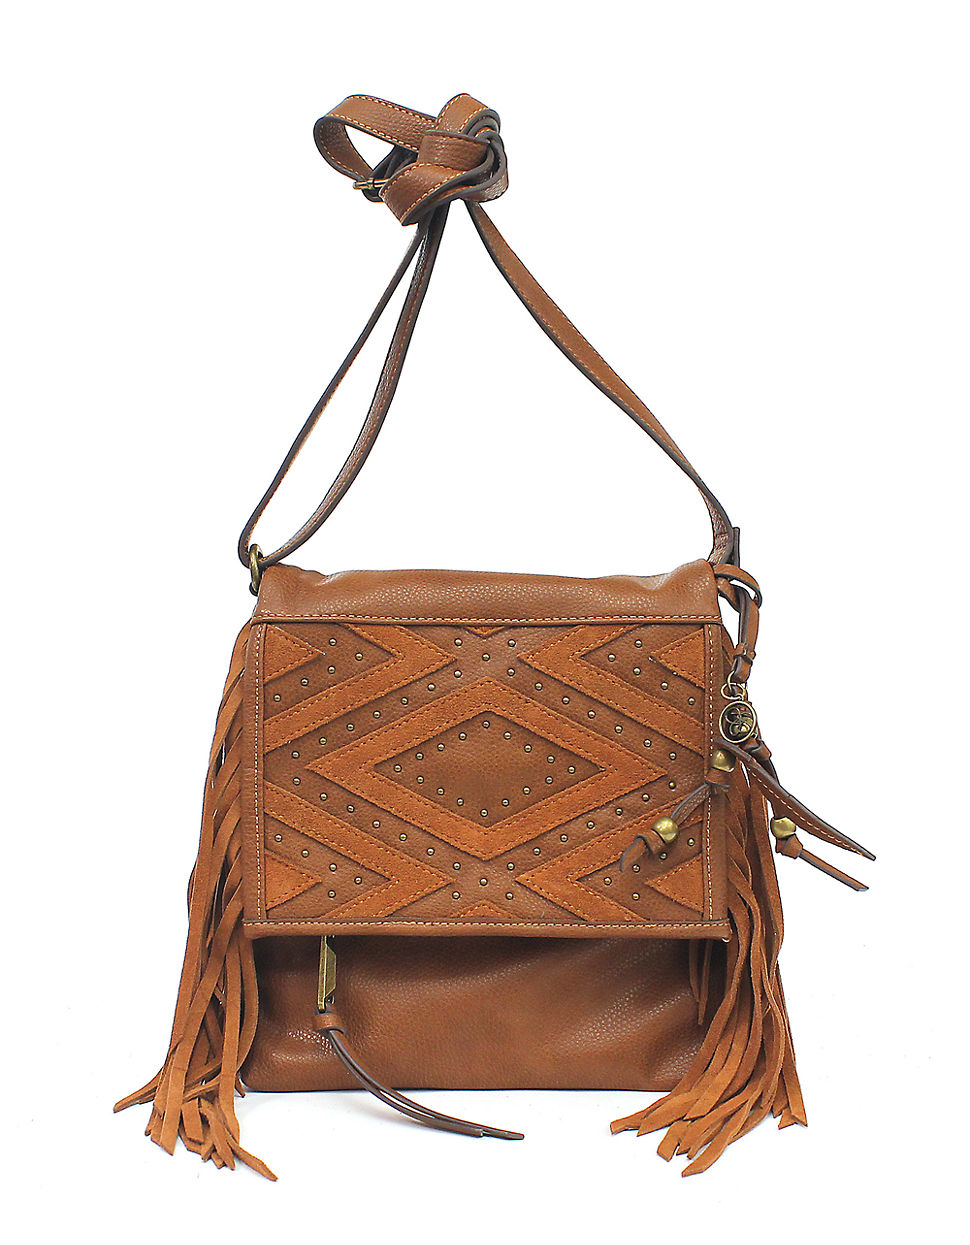 Jessica simpson Romy Faux Leather Crossbody Bag in Brown (Luggage) | Lyst